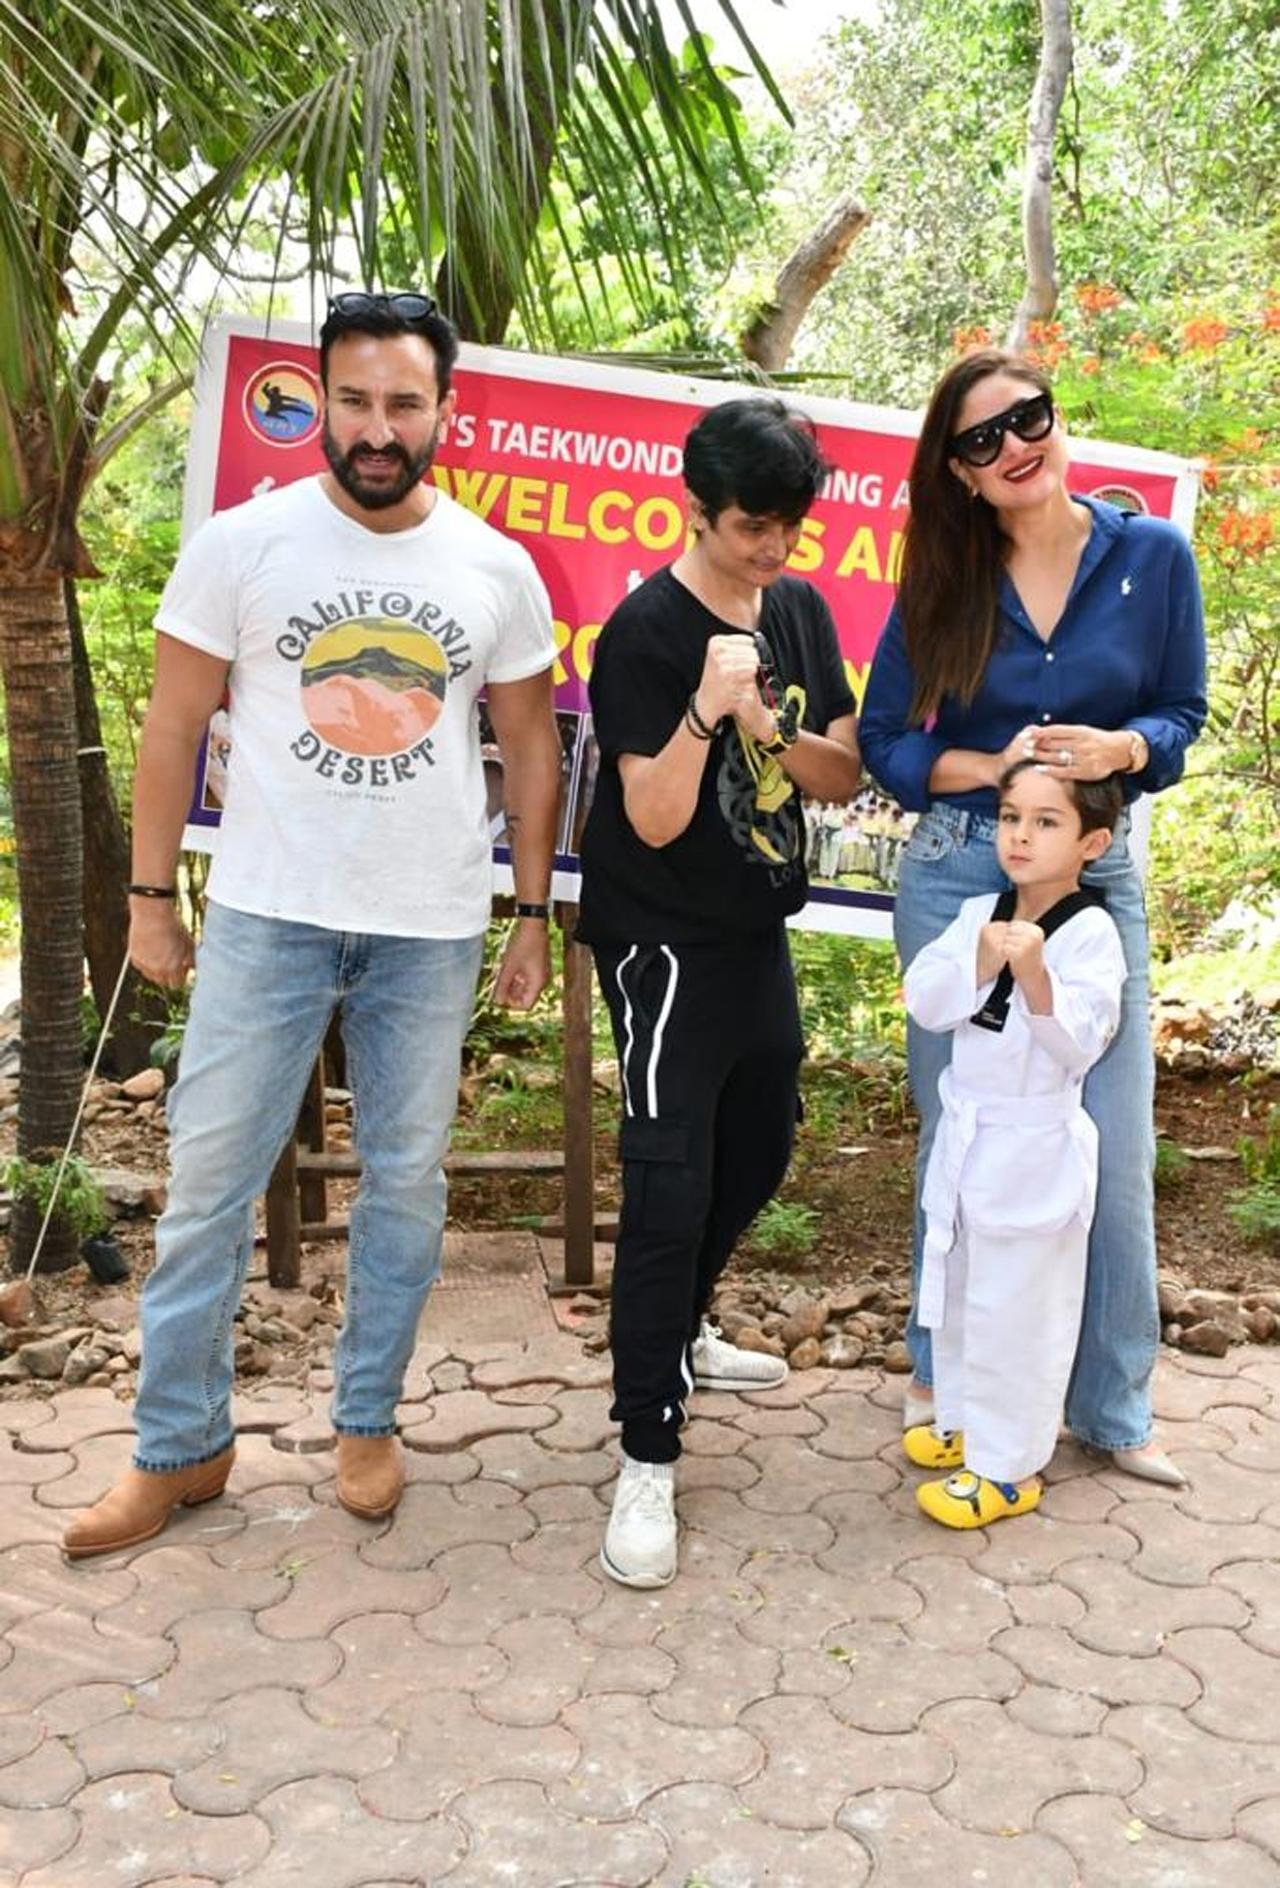 While Saif Ali Khan and Kareena Kapoor Khan had revealed the name of their first child Taimur, born in 2016, to the media, they refrained from doing so when it came to their newborn. The name of their second son Jehangir, also called Jeh, surfaced on social media when her recent book was released.